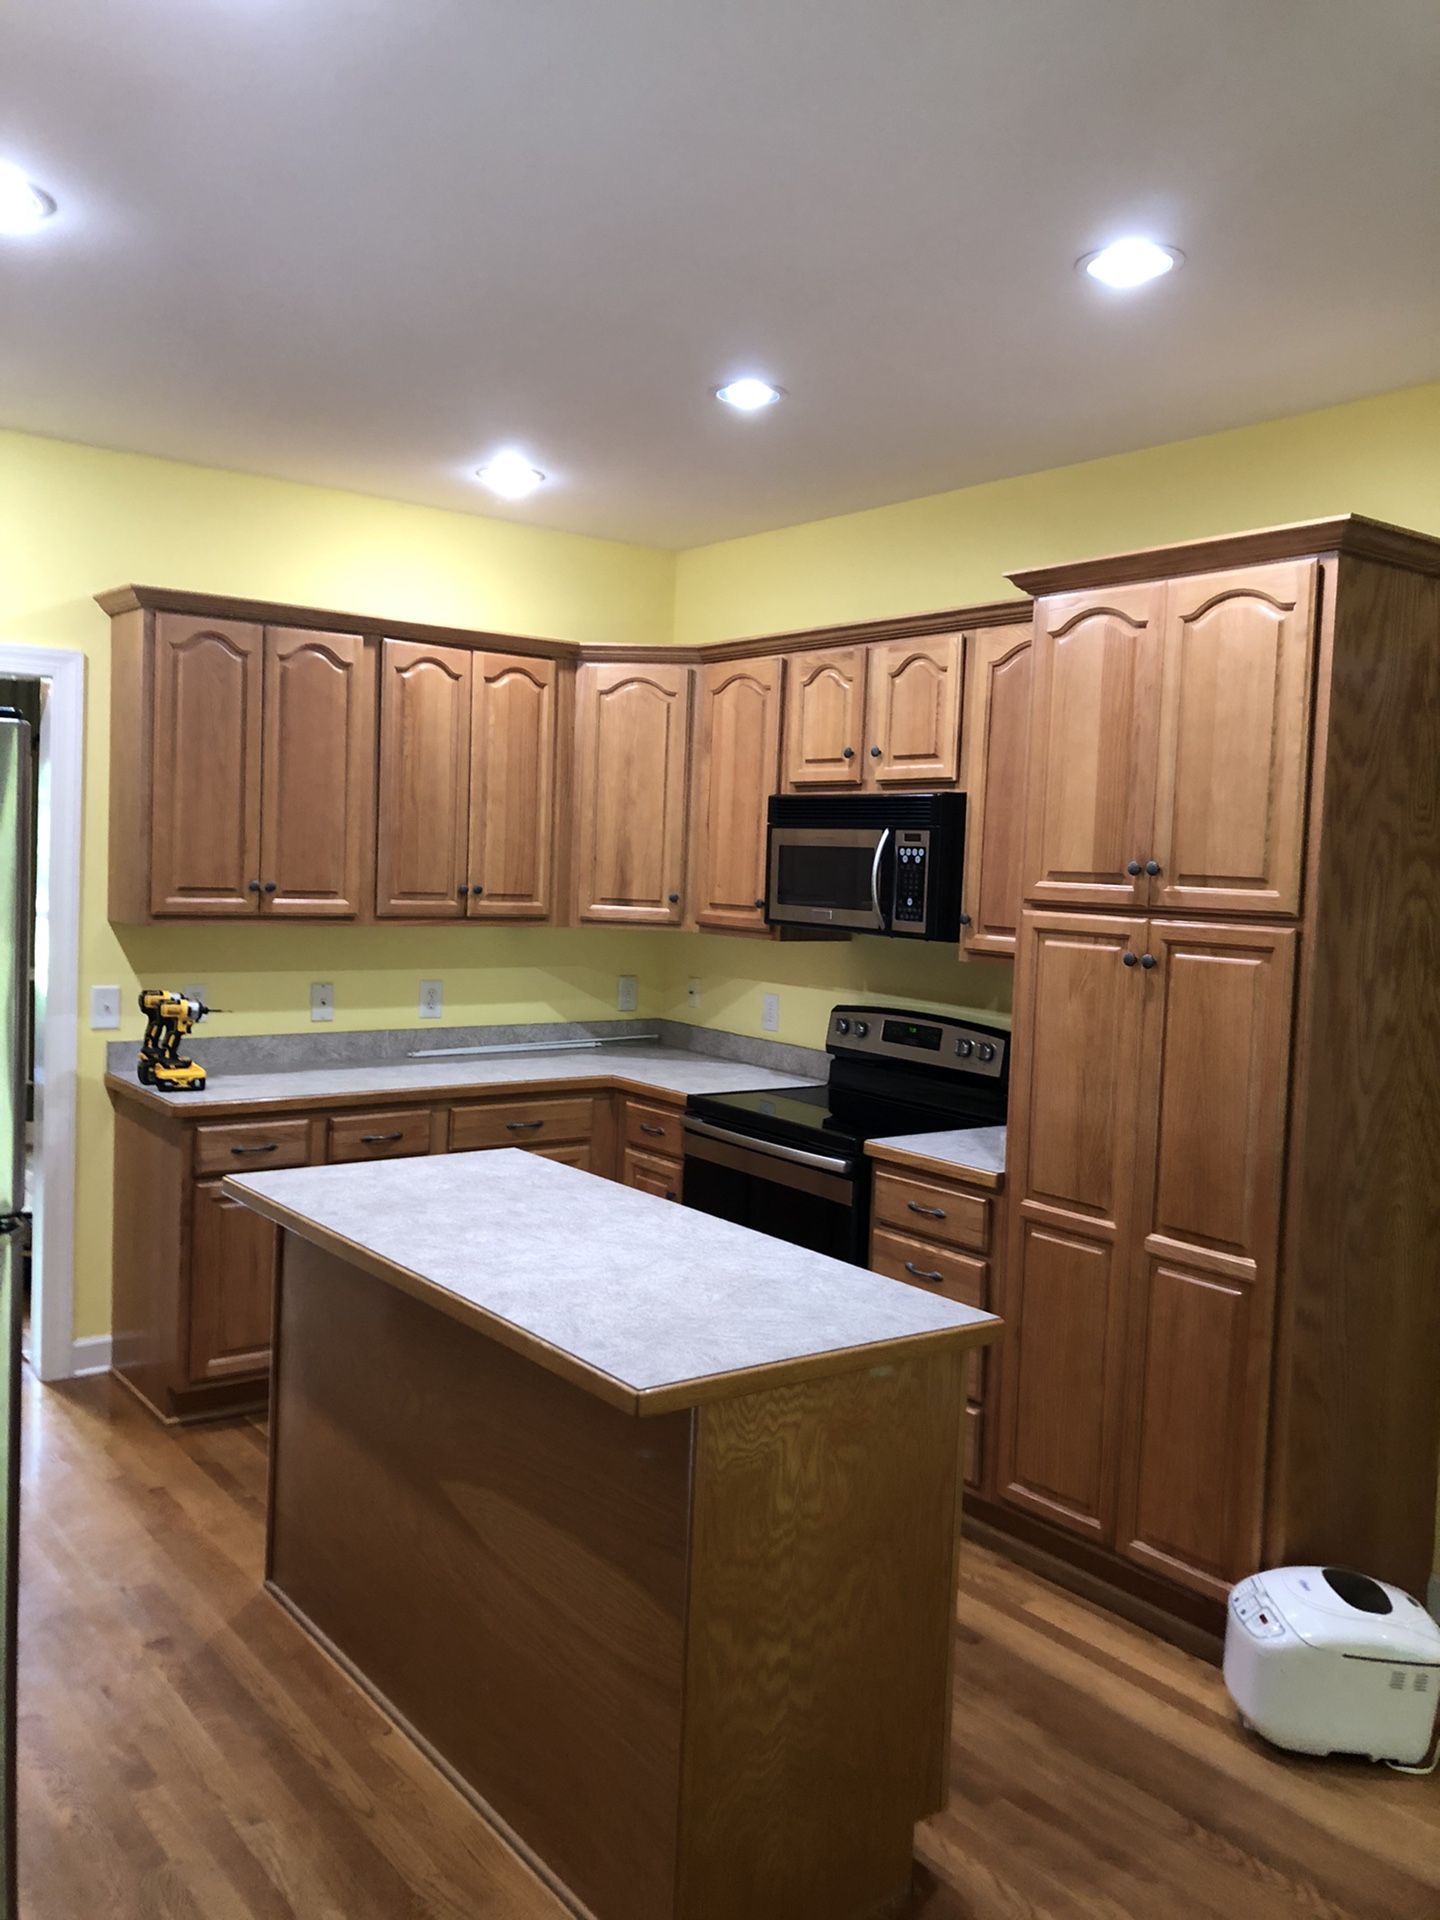 Kitchen and bathroom cabinets